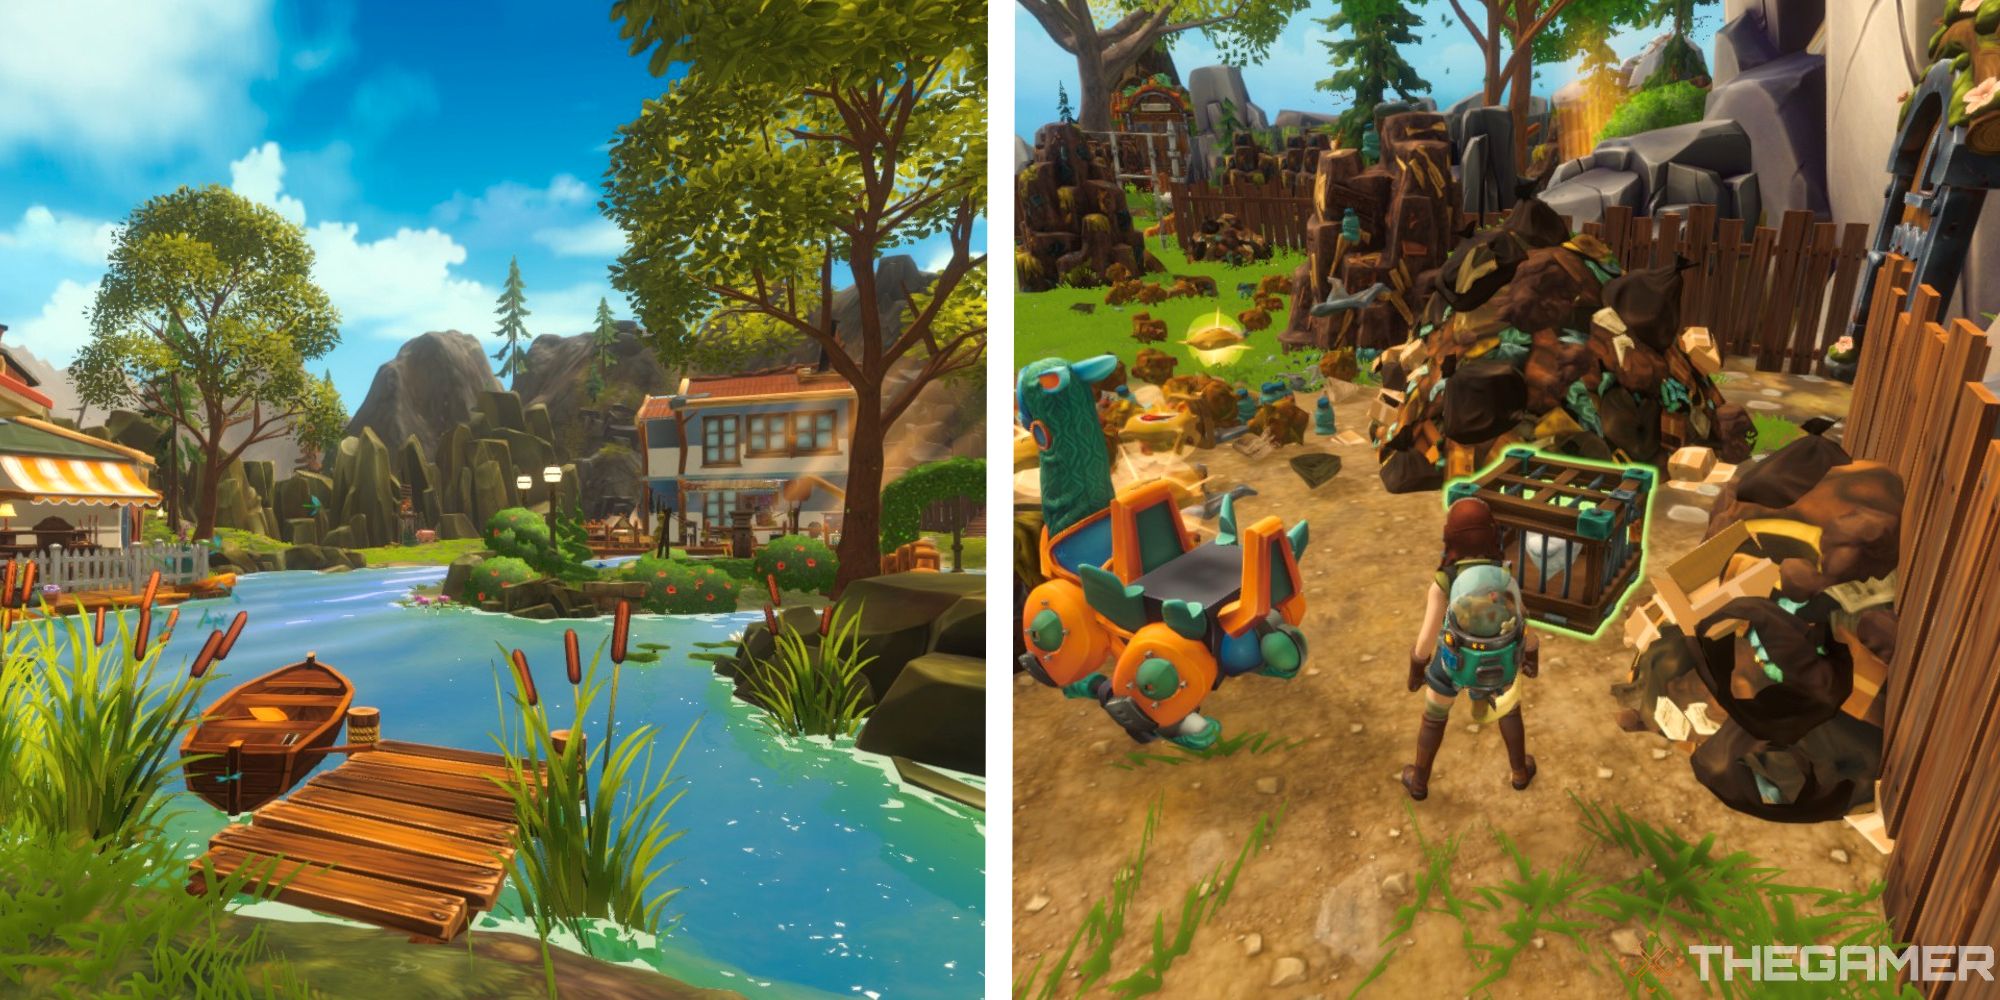 image of waterfront with boat and house next to image of player clearing trash to reveal a chicken